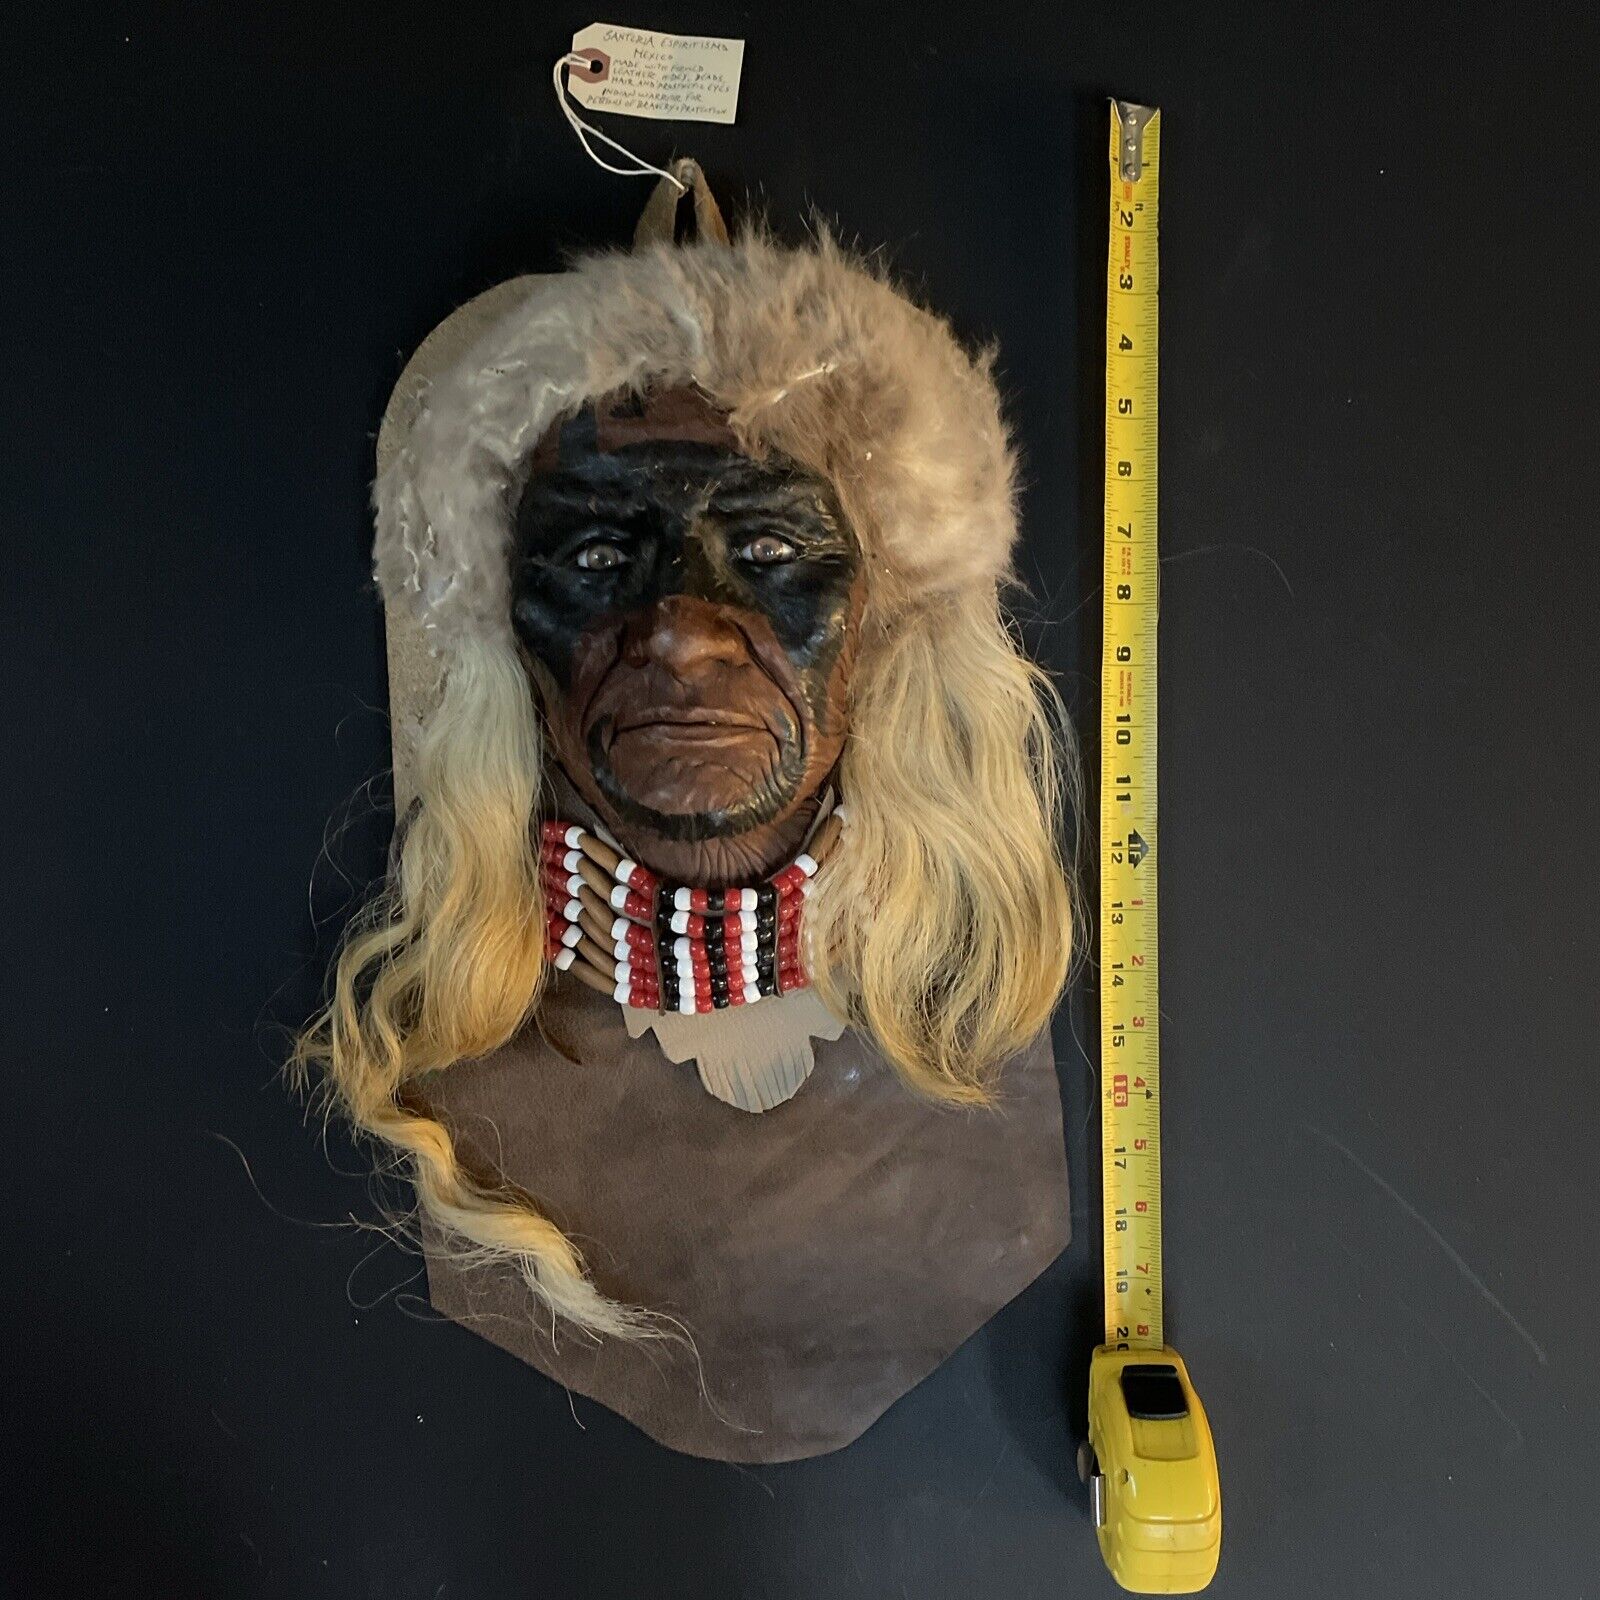 Native American Warrior Wall Plaque Handmade, Leather Beads Hair Prosthetic Eyes